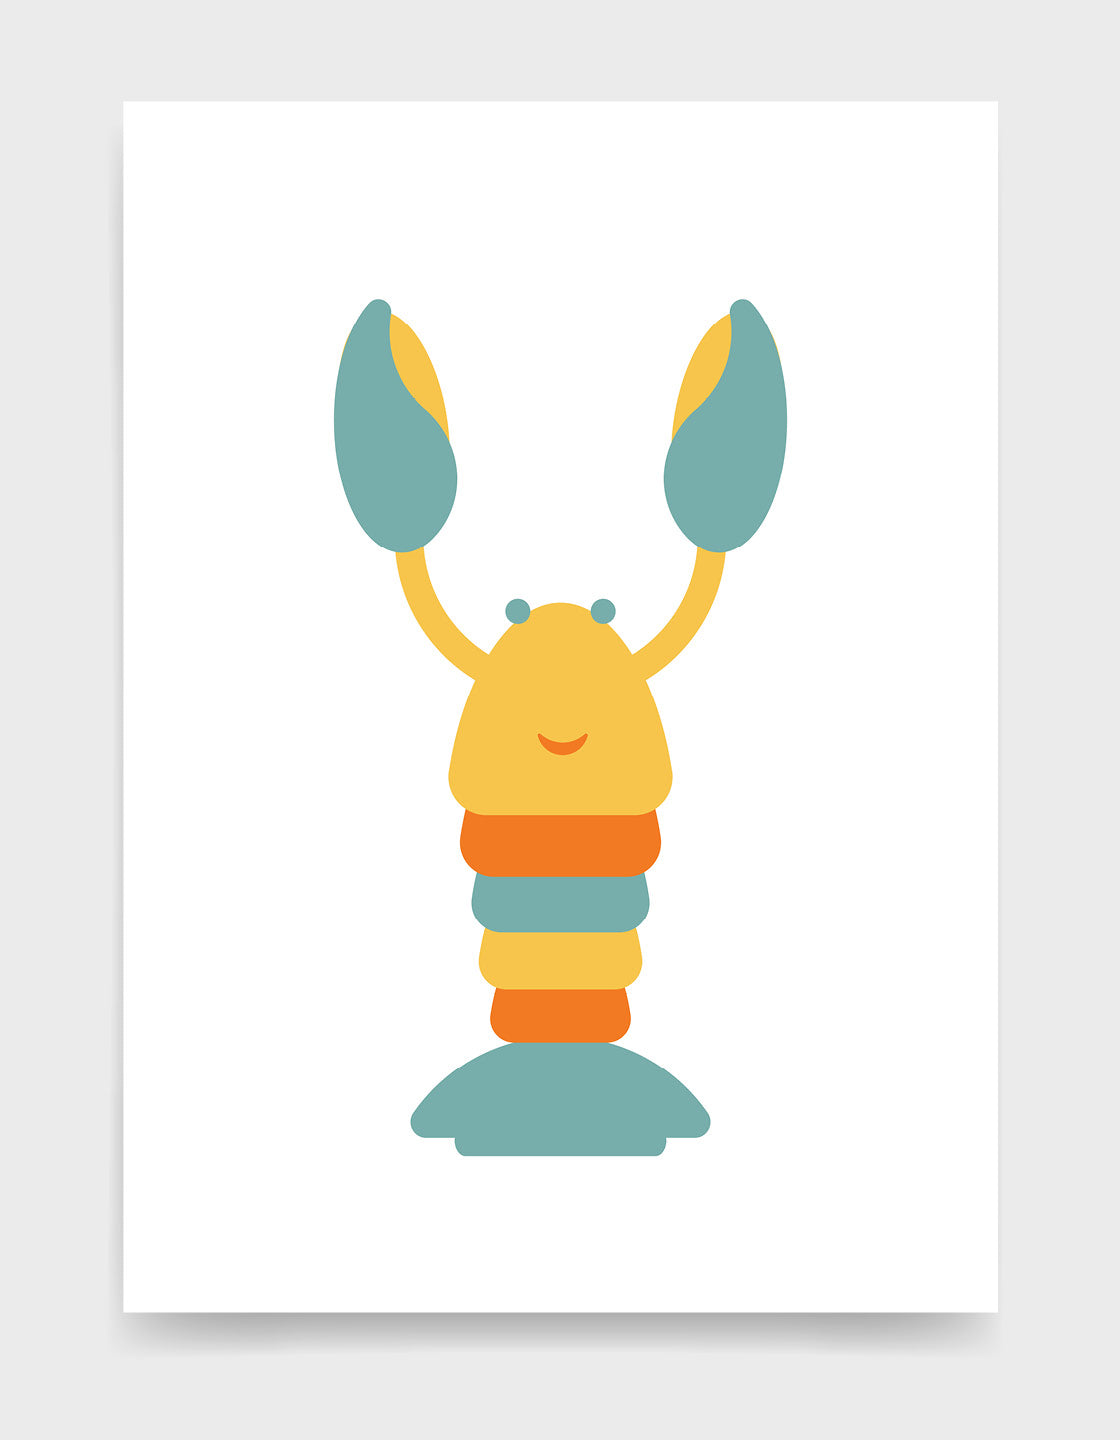 Kids cute lobster print featuring a mulito colour lobster in yellow, orange and blue with a smiling friendly face against a white background